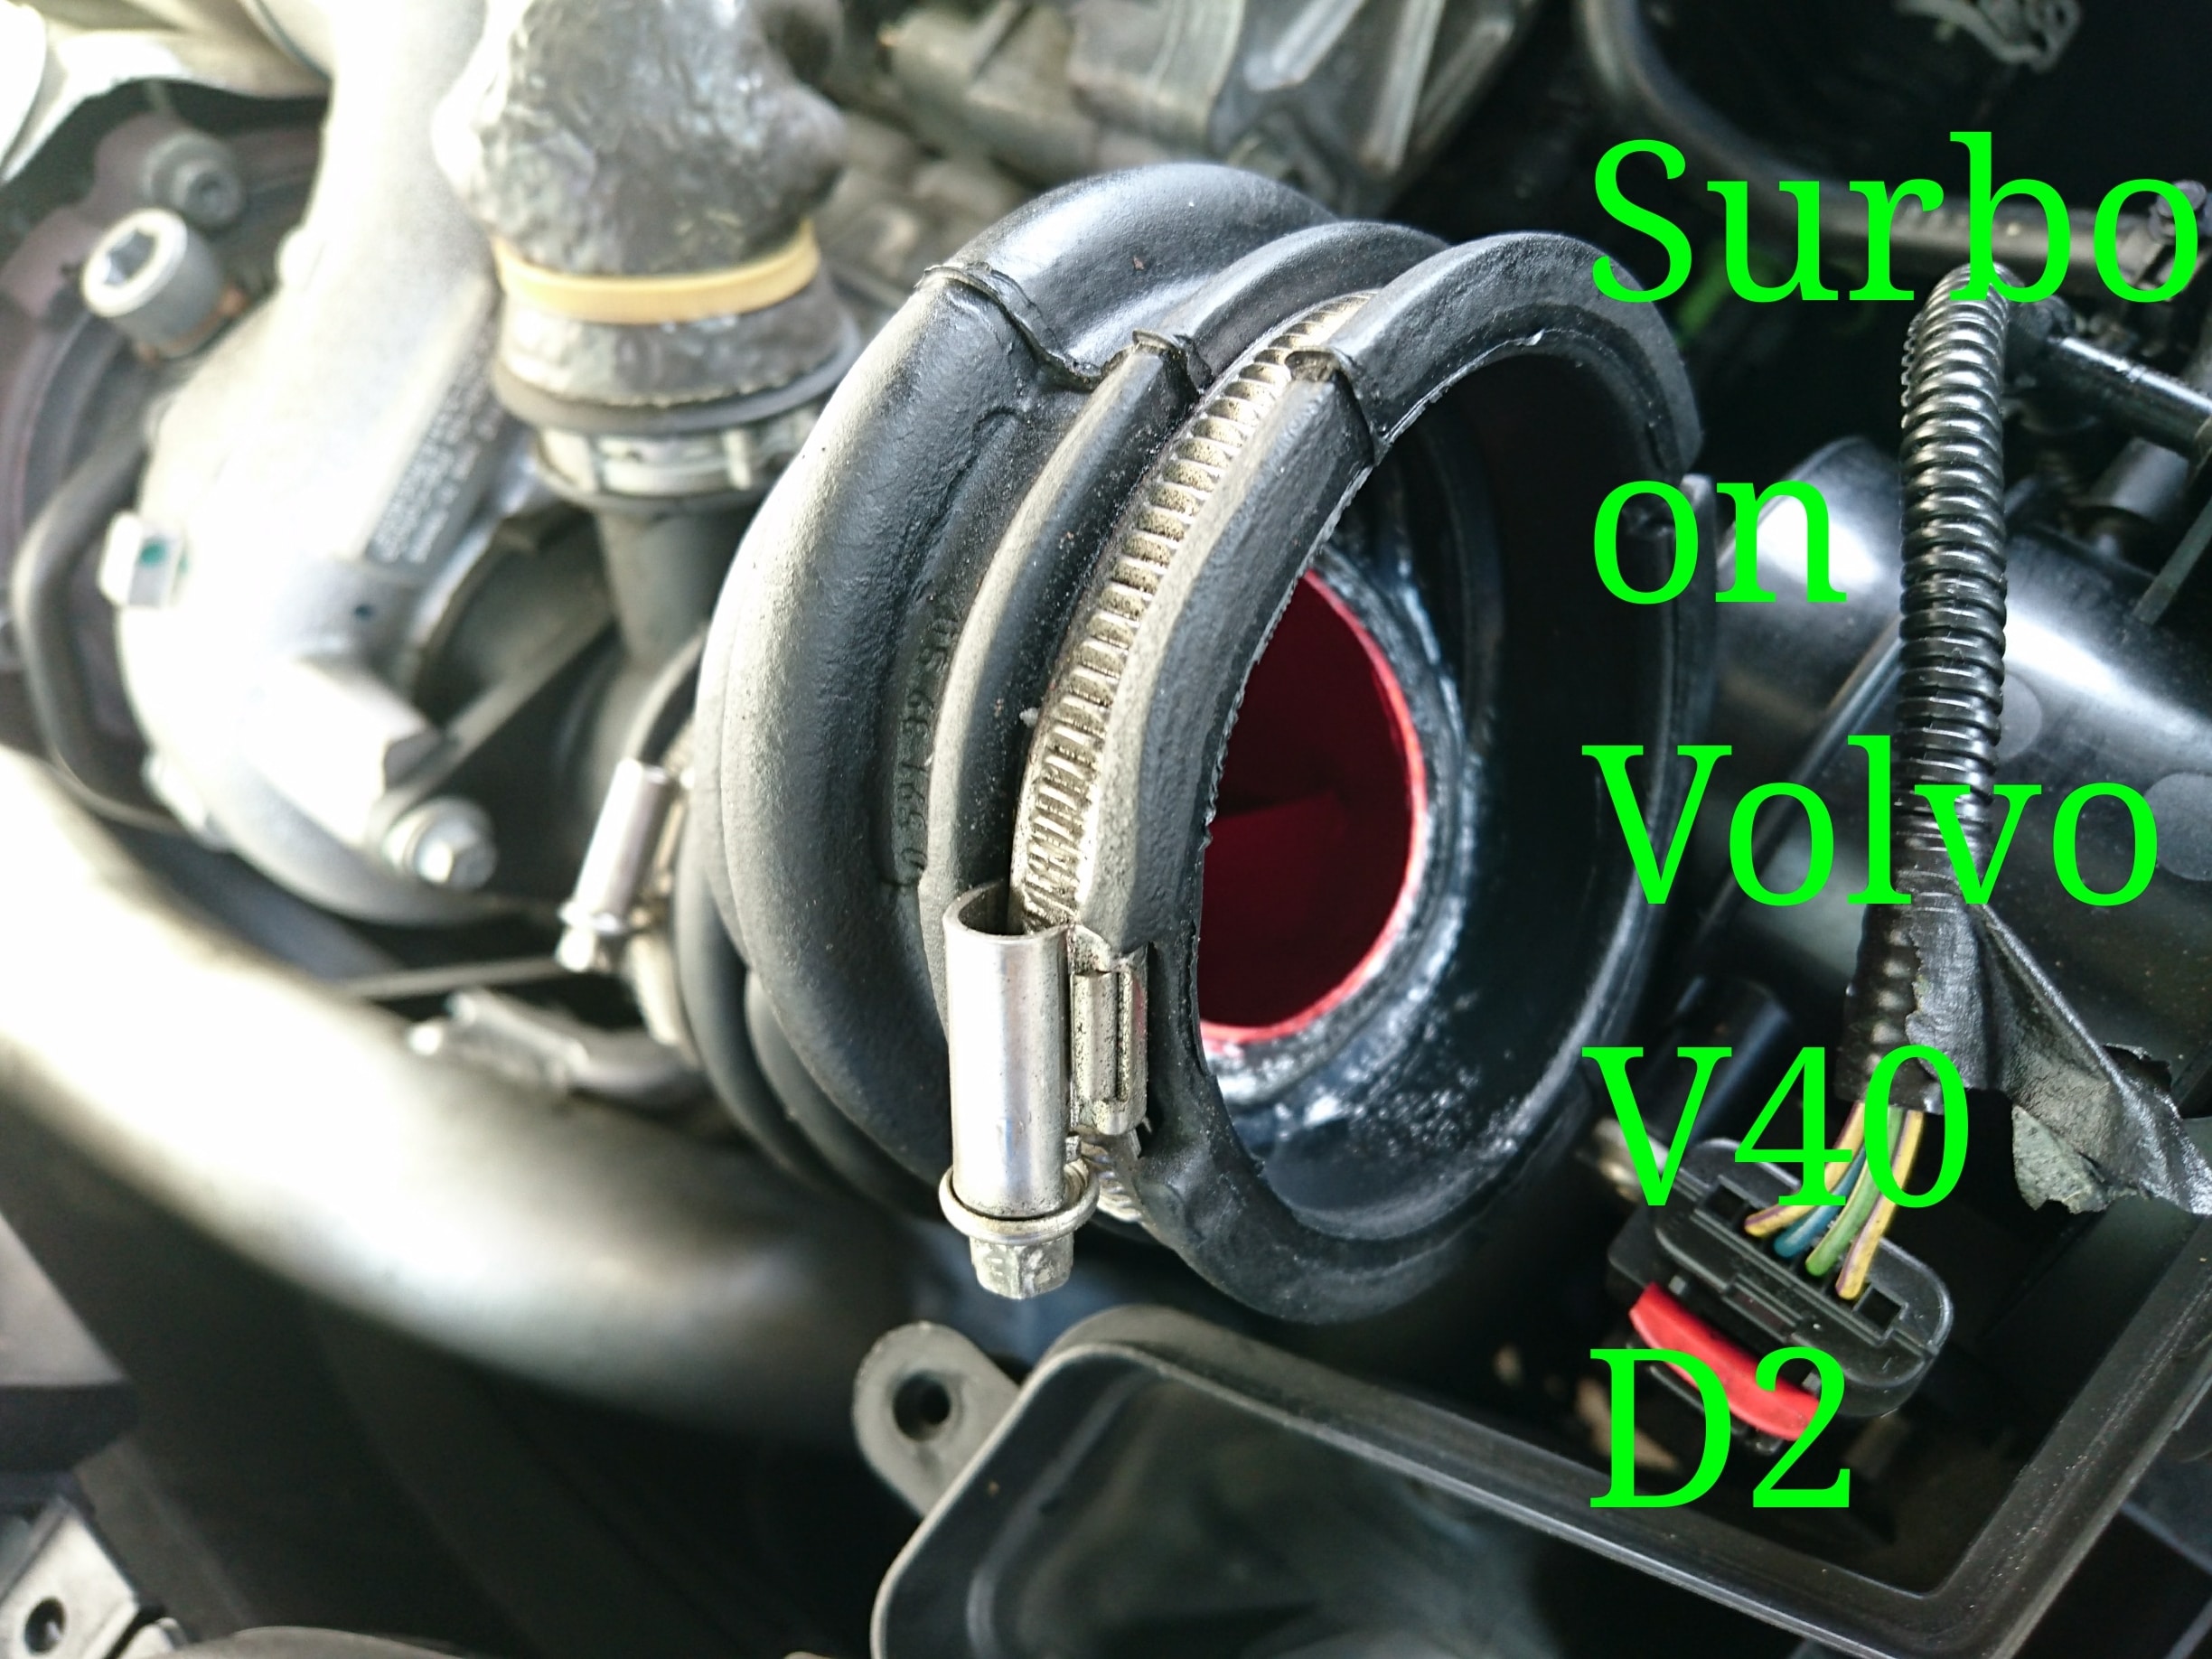 Photo: Surbo fitted on the Volvo V40 D2 turbodiesel